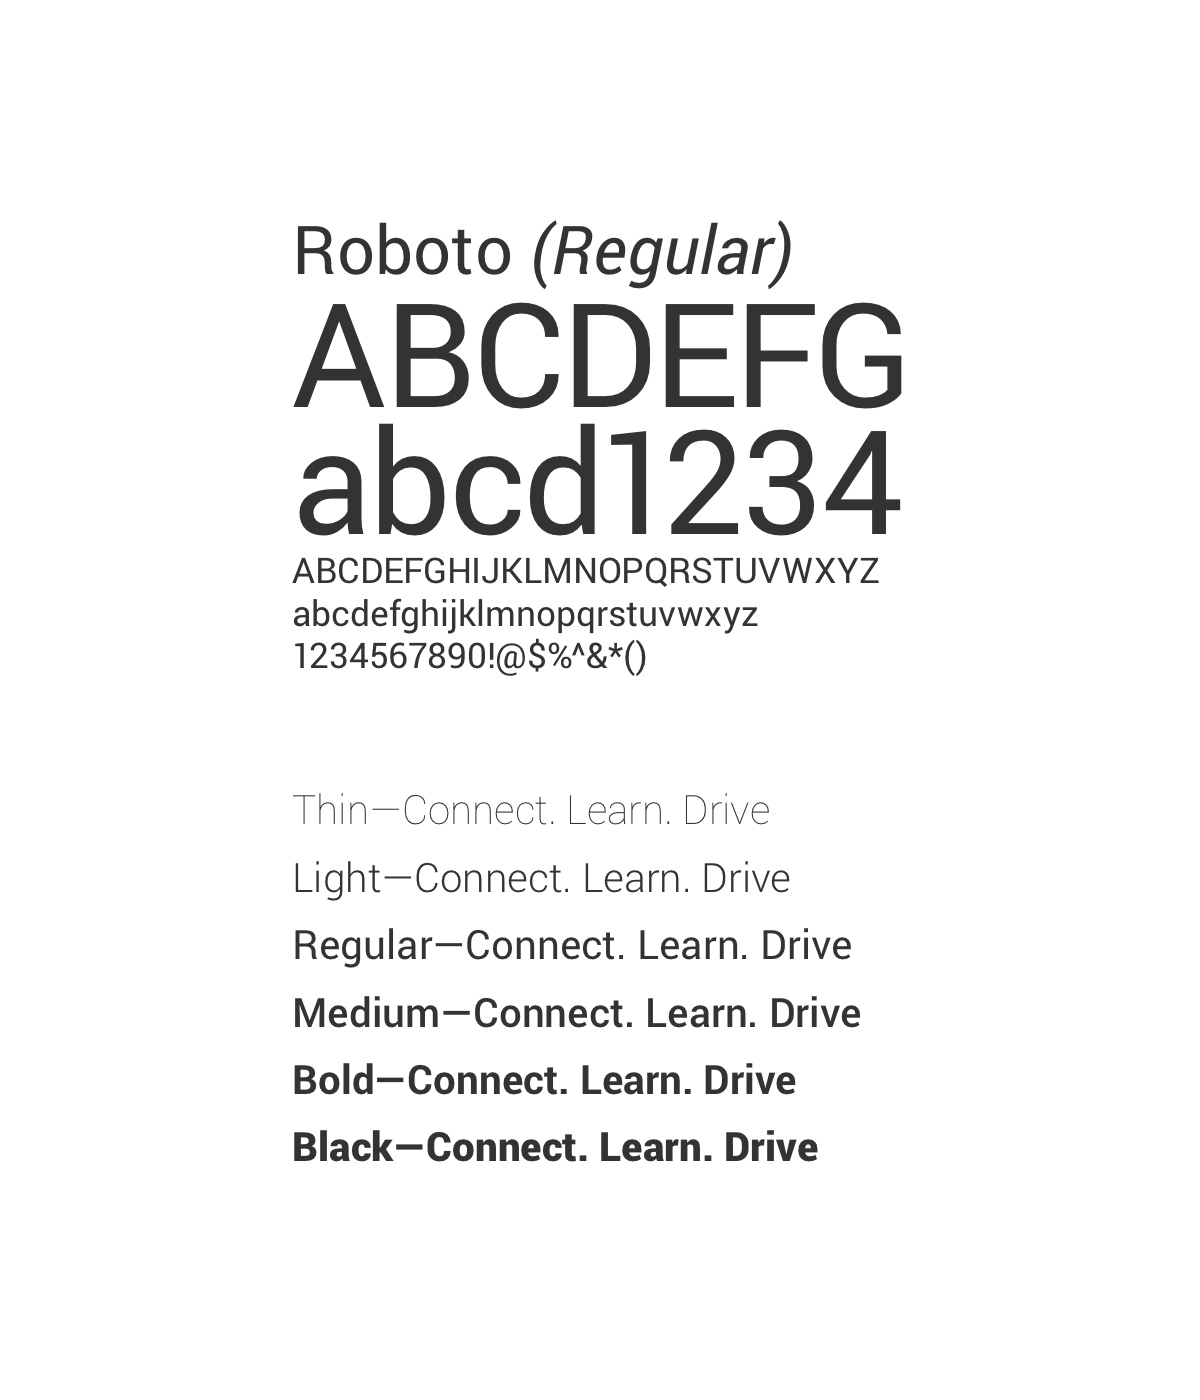 We chose the Roboto Google Font as our corporate typeface